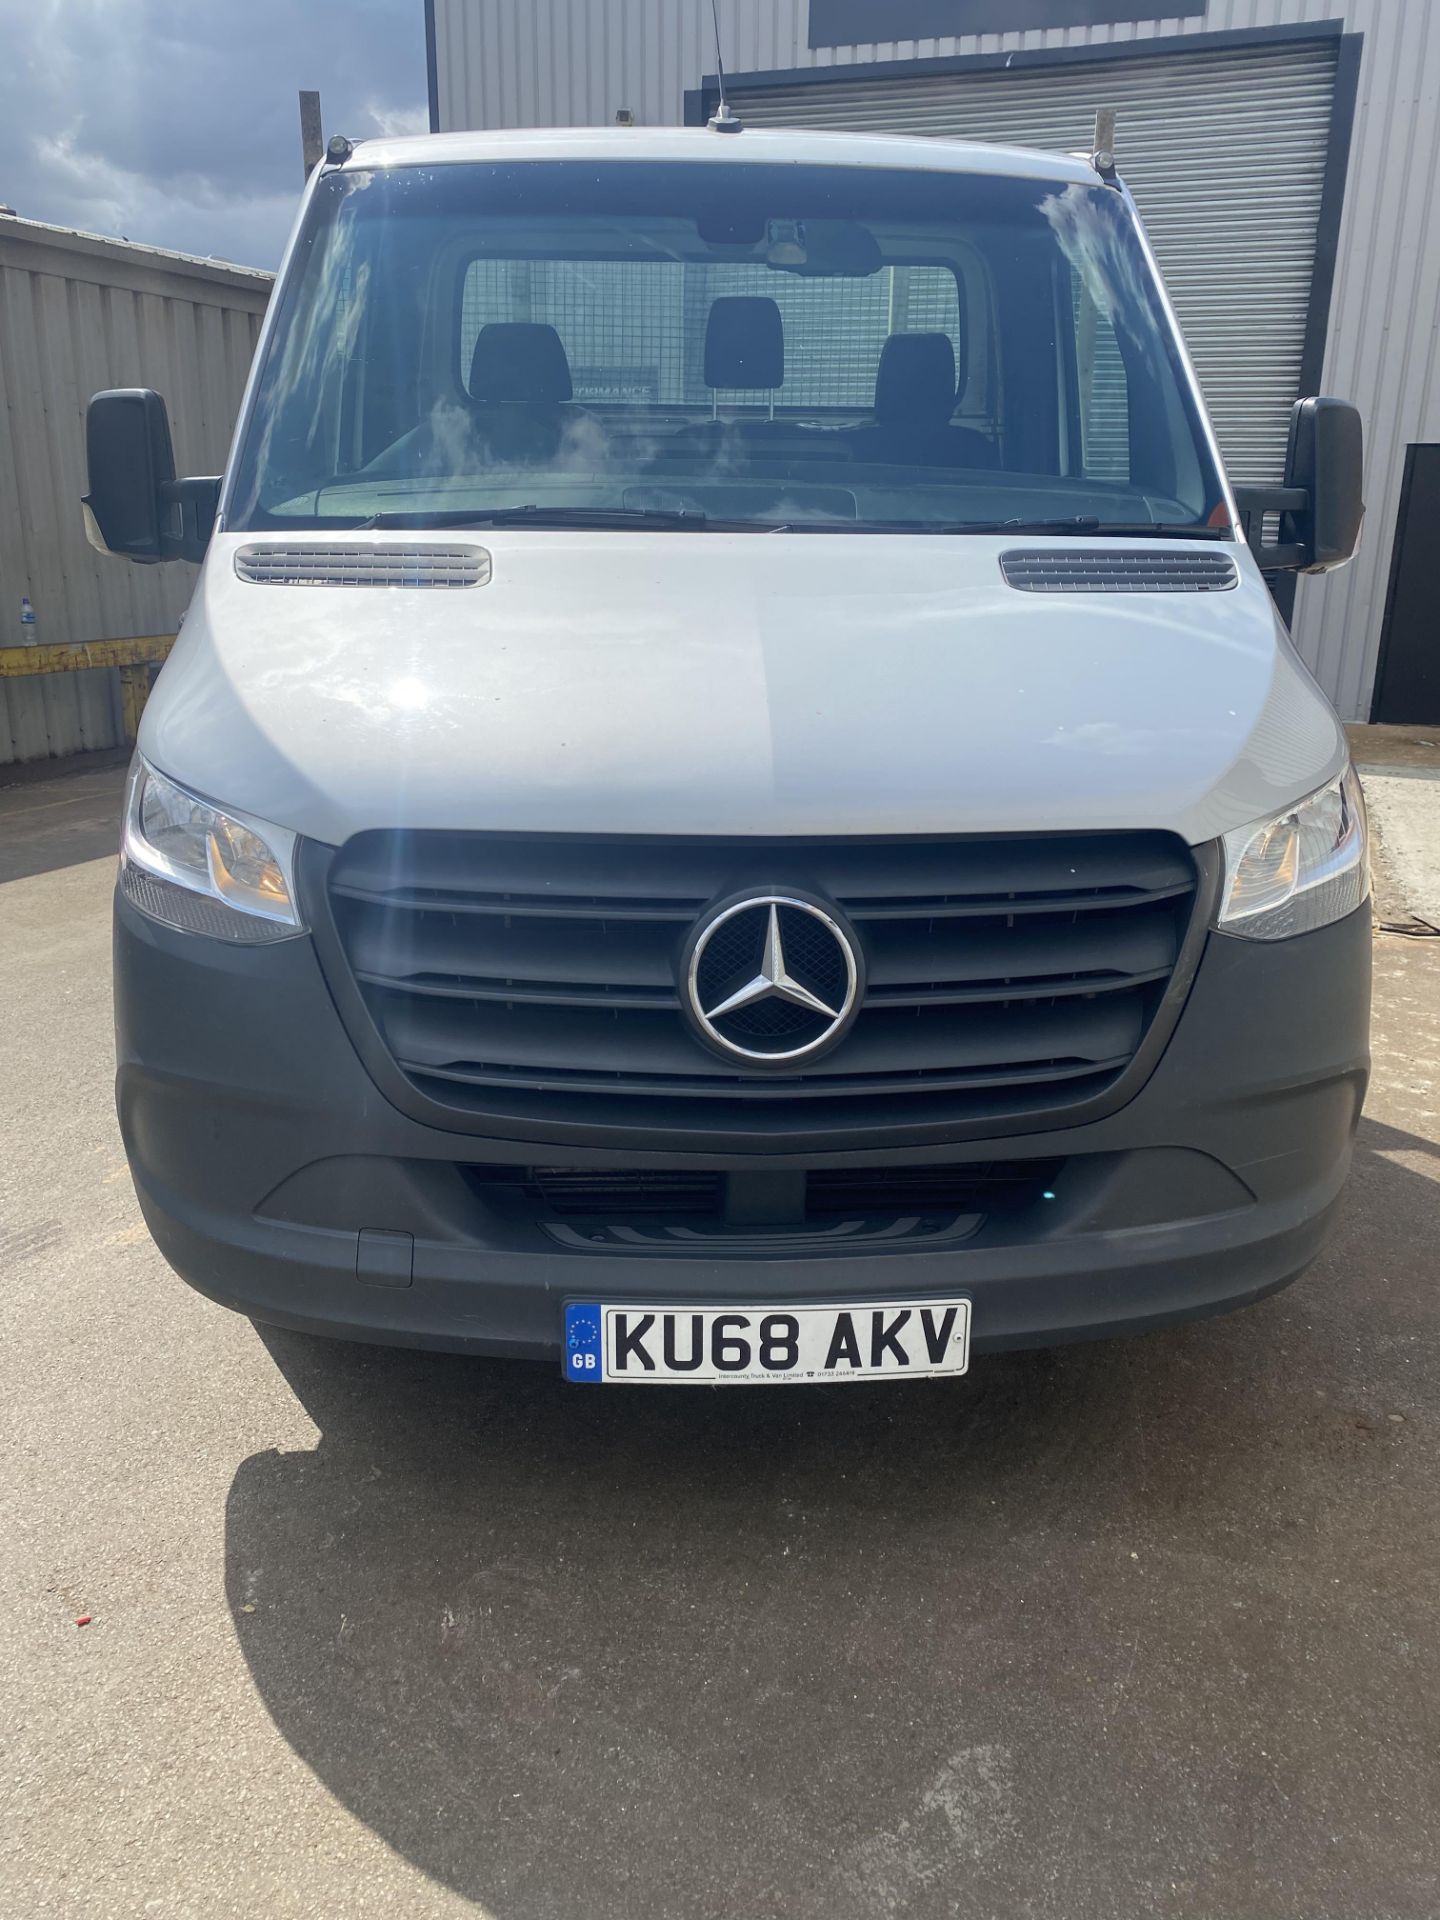 2018 MERCEDES BENZ SPRINTER 316 2.1 CDI L3 DIESEL RWD 3.5T CHASSIS CAB ALUMINIUM FLAT EXTRA LONG - Image 2 of 23